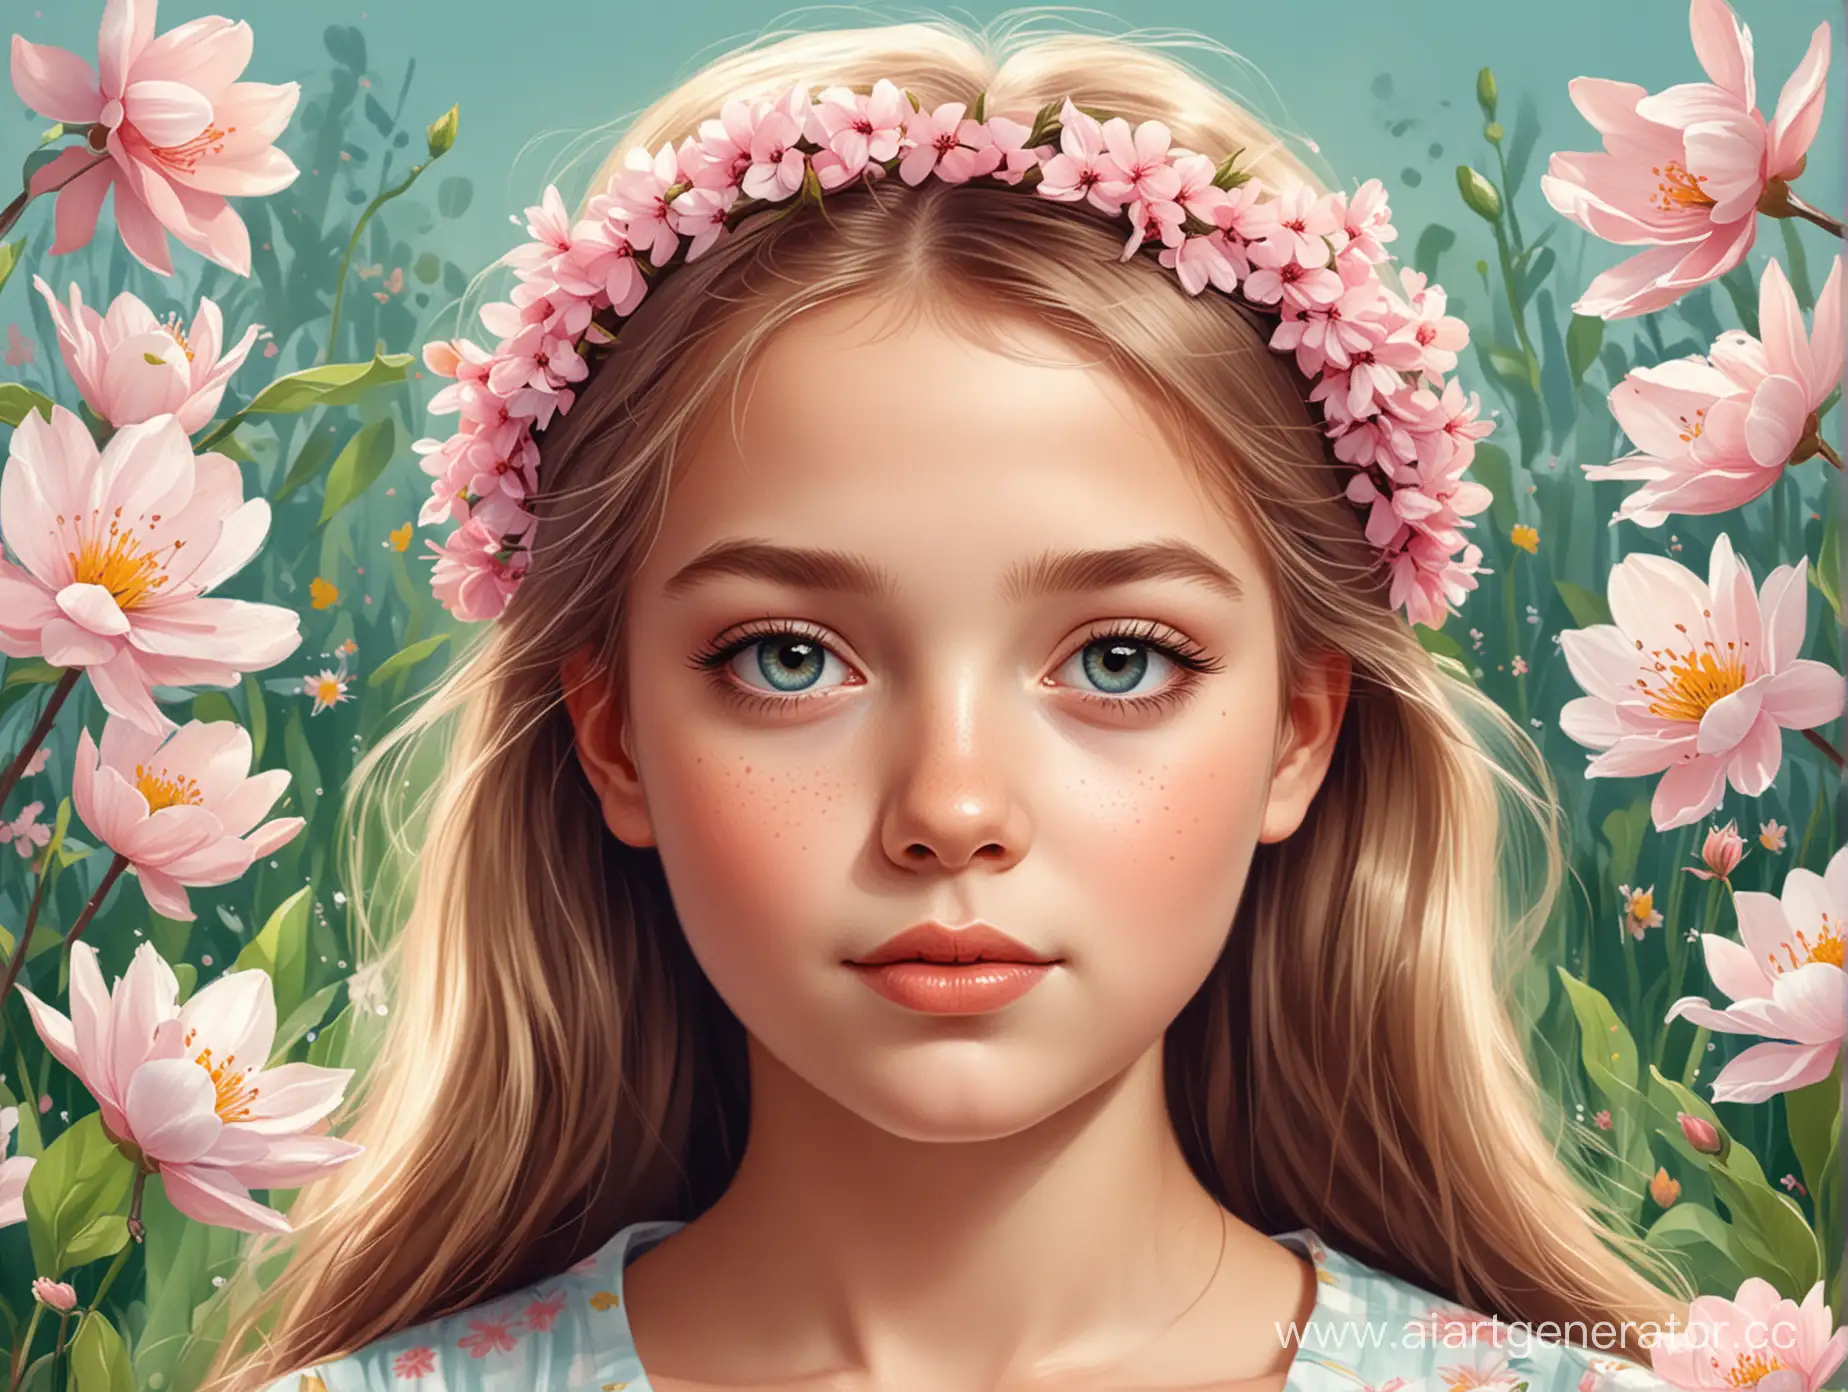 Spring-Digital-Portrait-of-a-Girl-with-Blossoming-Flowers